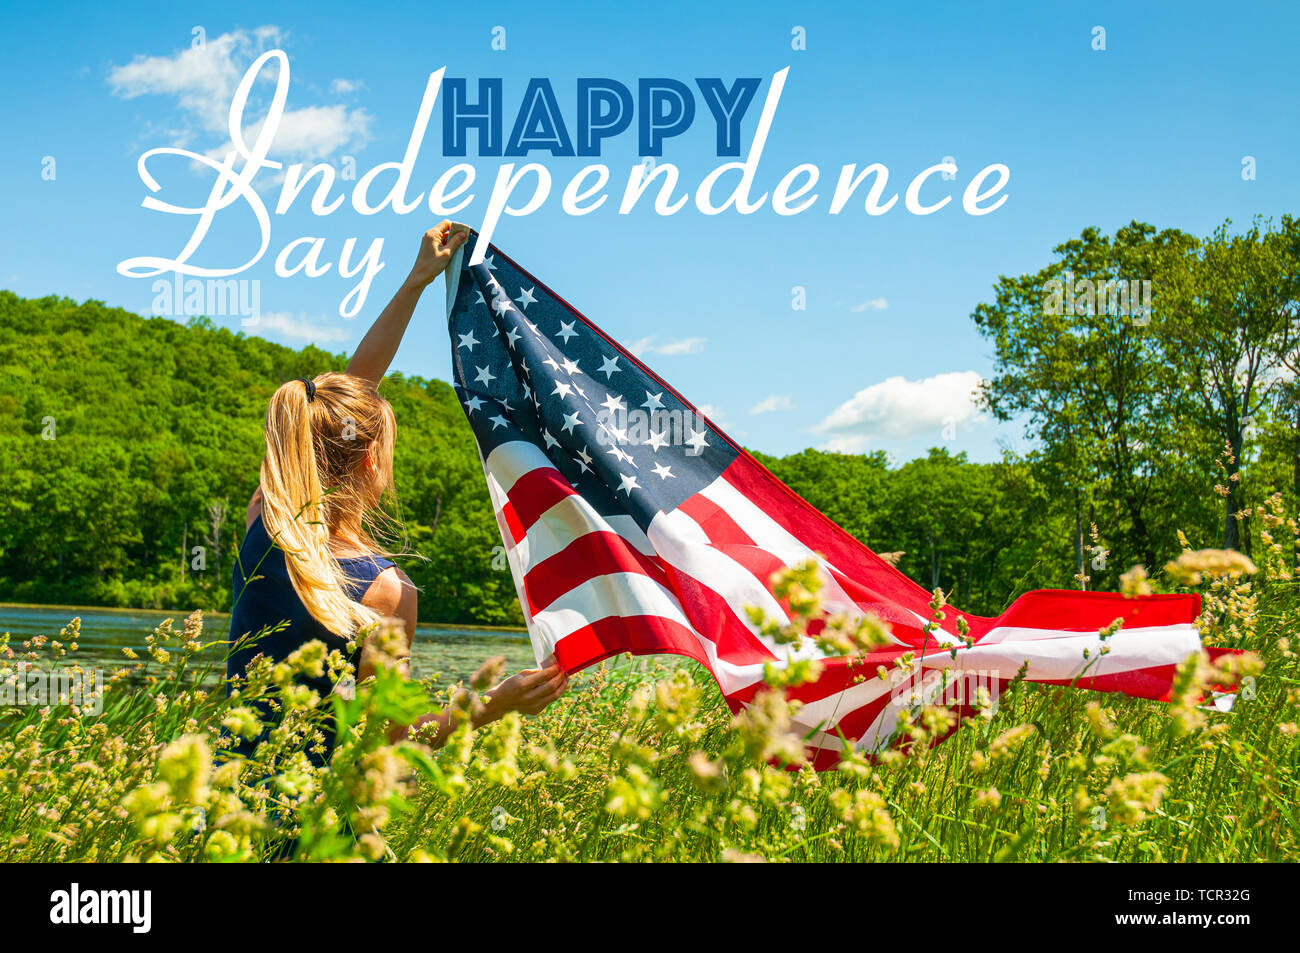 Happy Independence day, 4th of July. Young woman holding American flag. Stock Photo